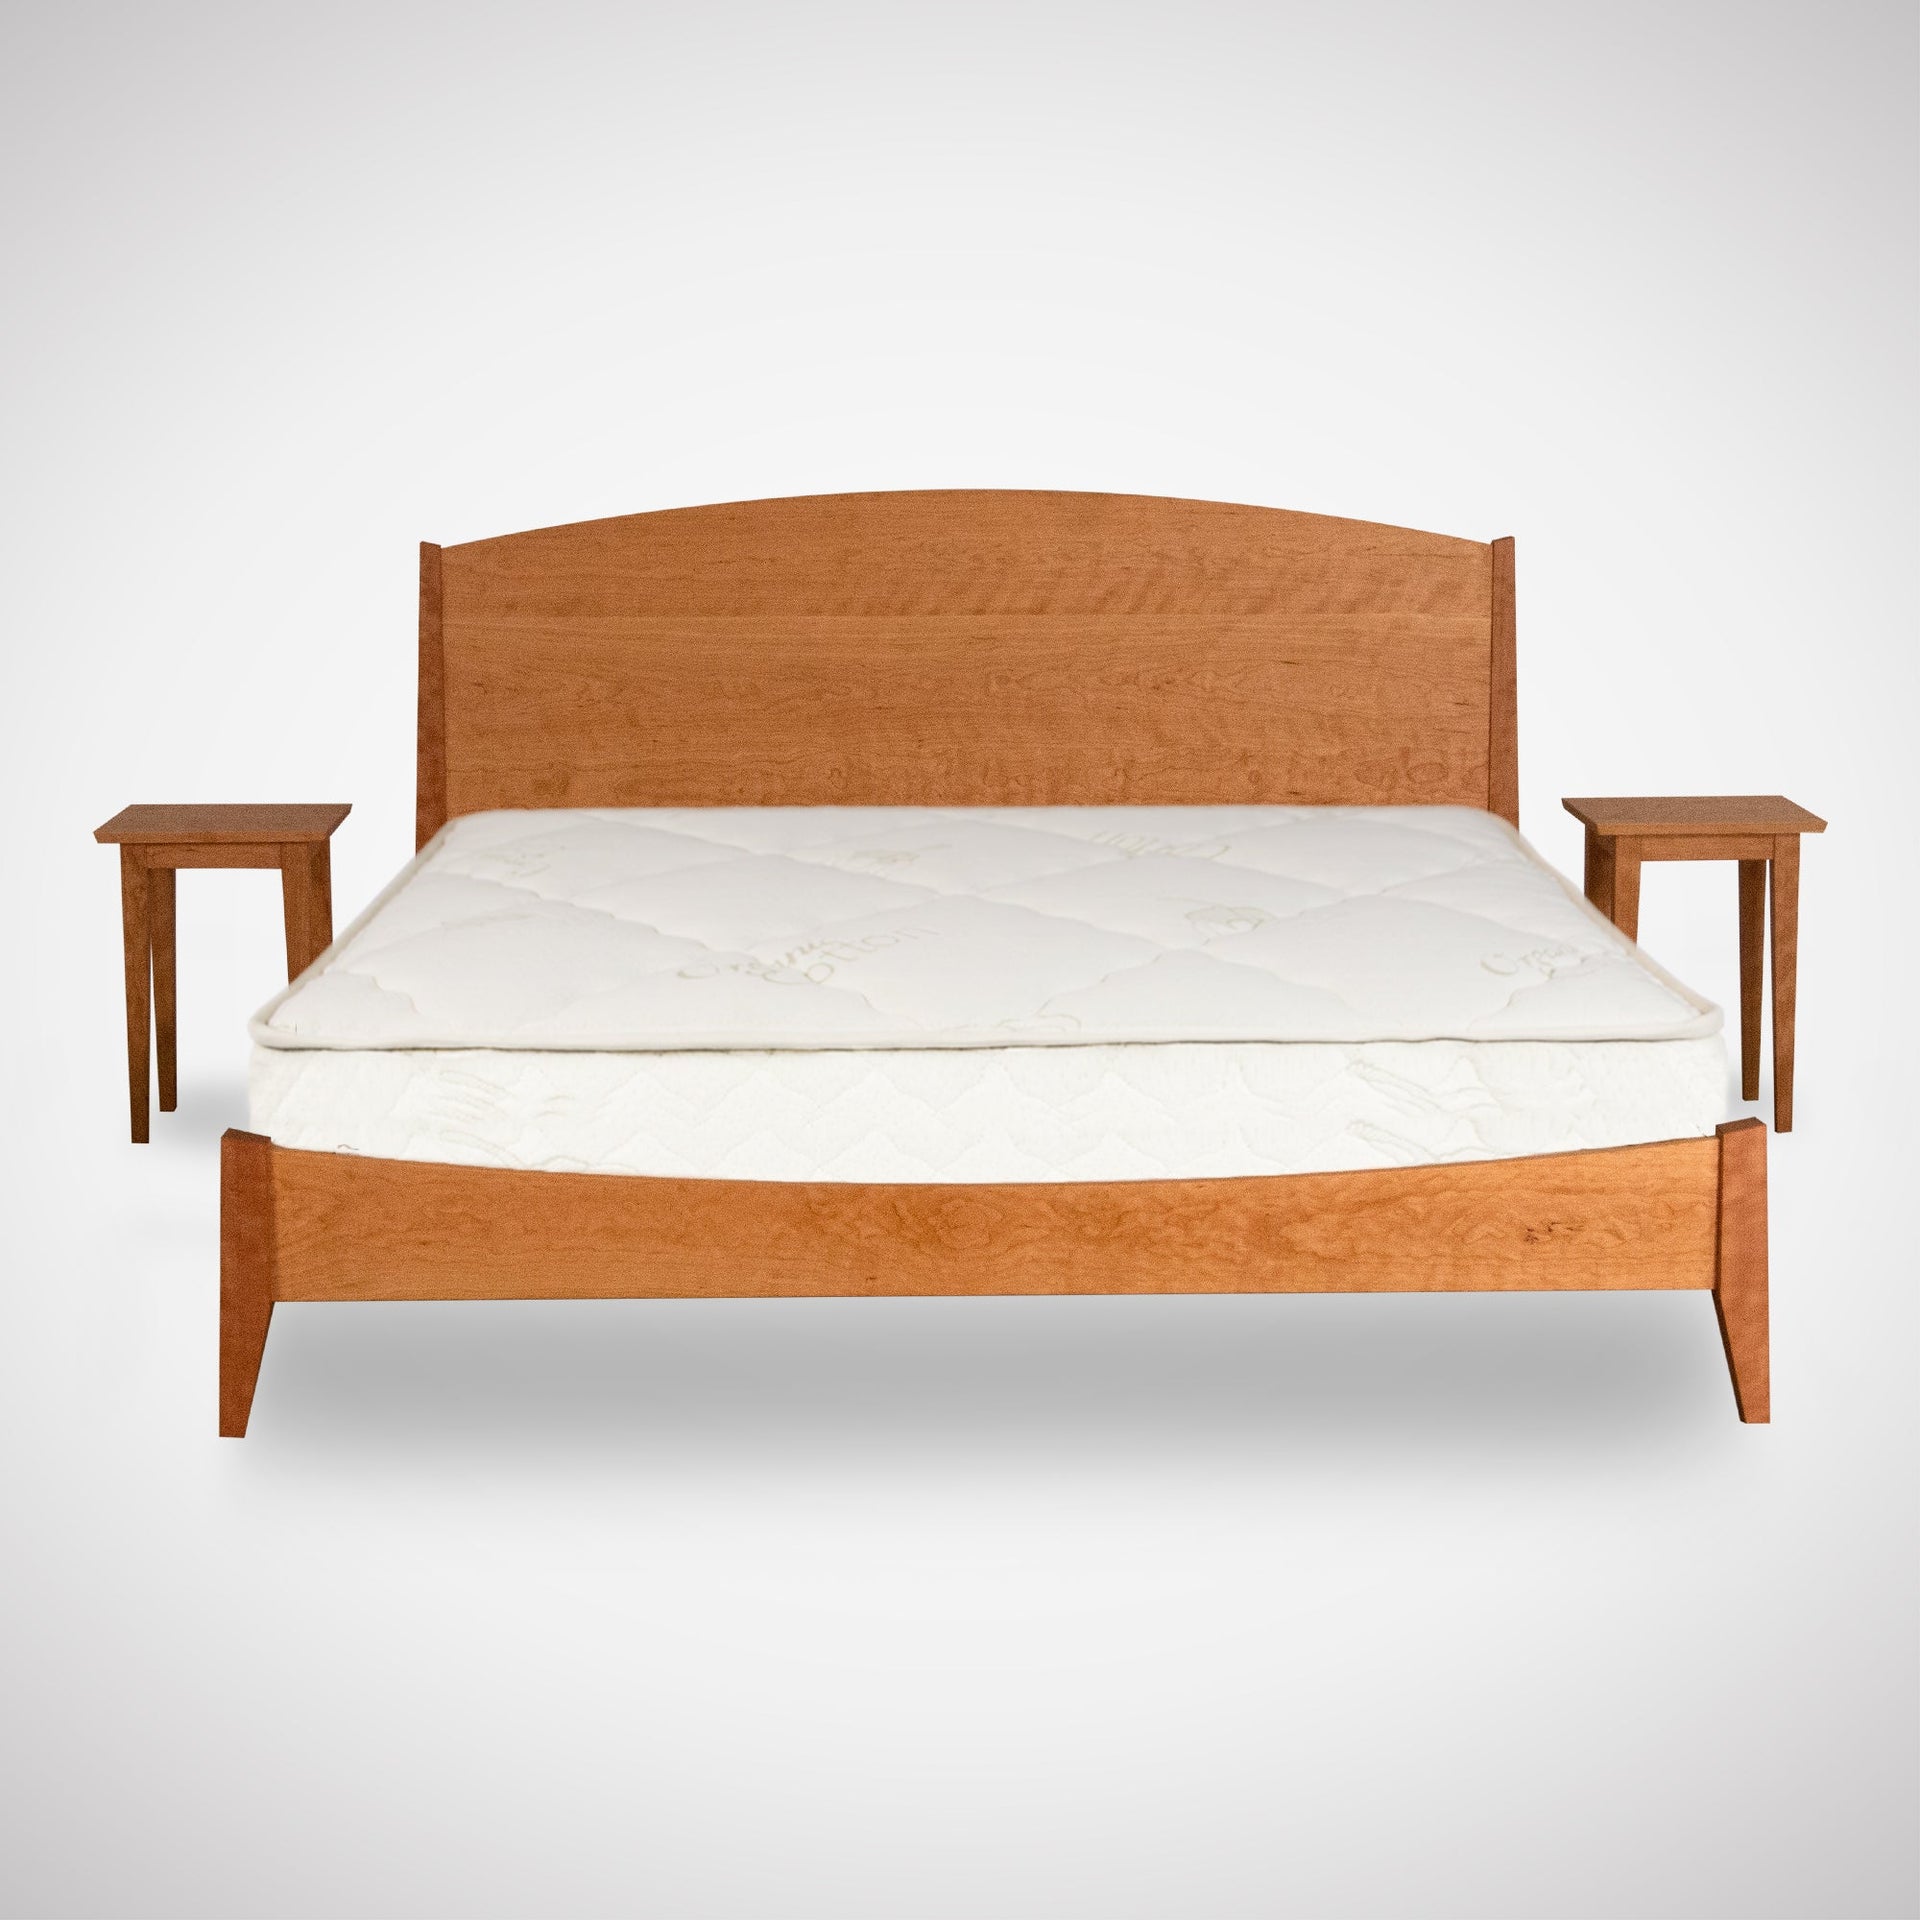 Shaker solid wood bed frame crafted in Columbus, Ohio